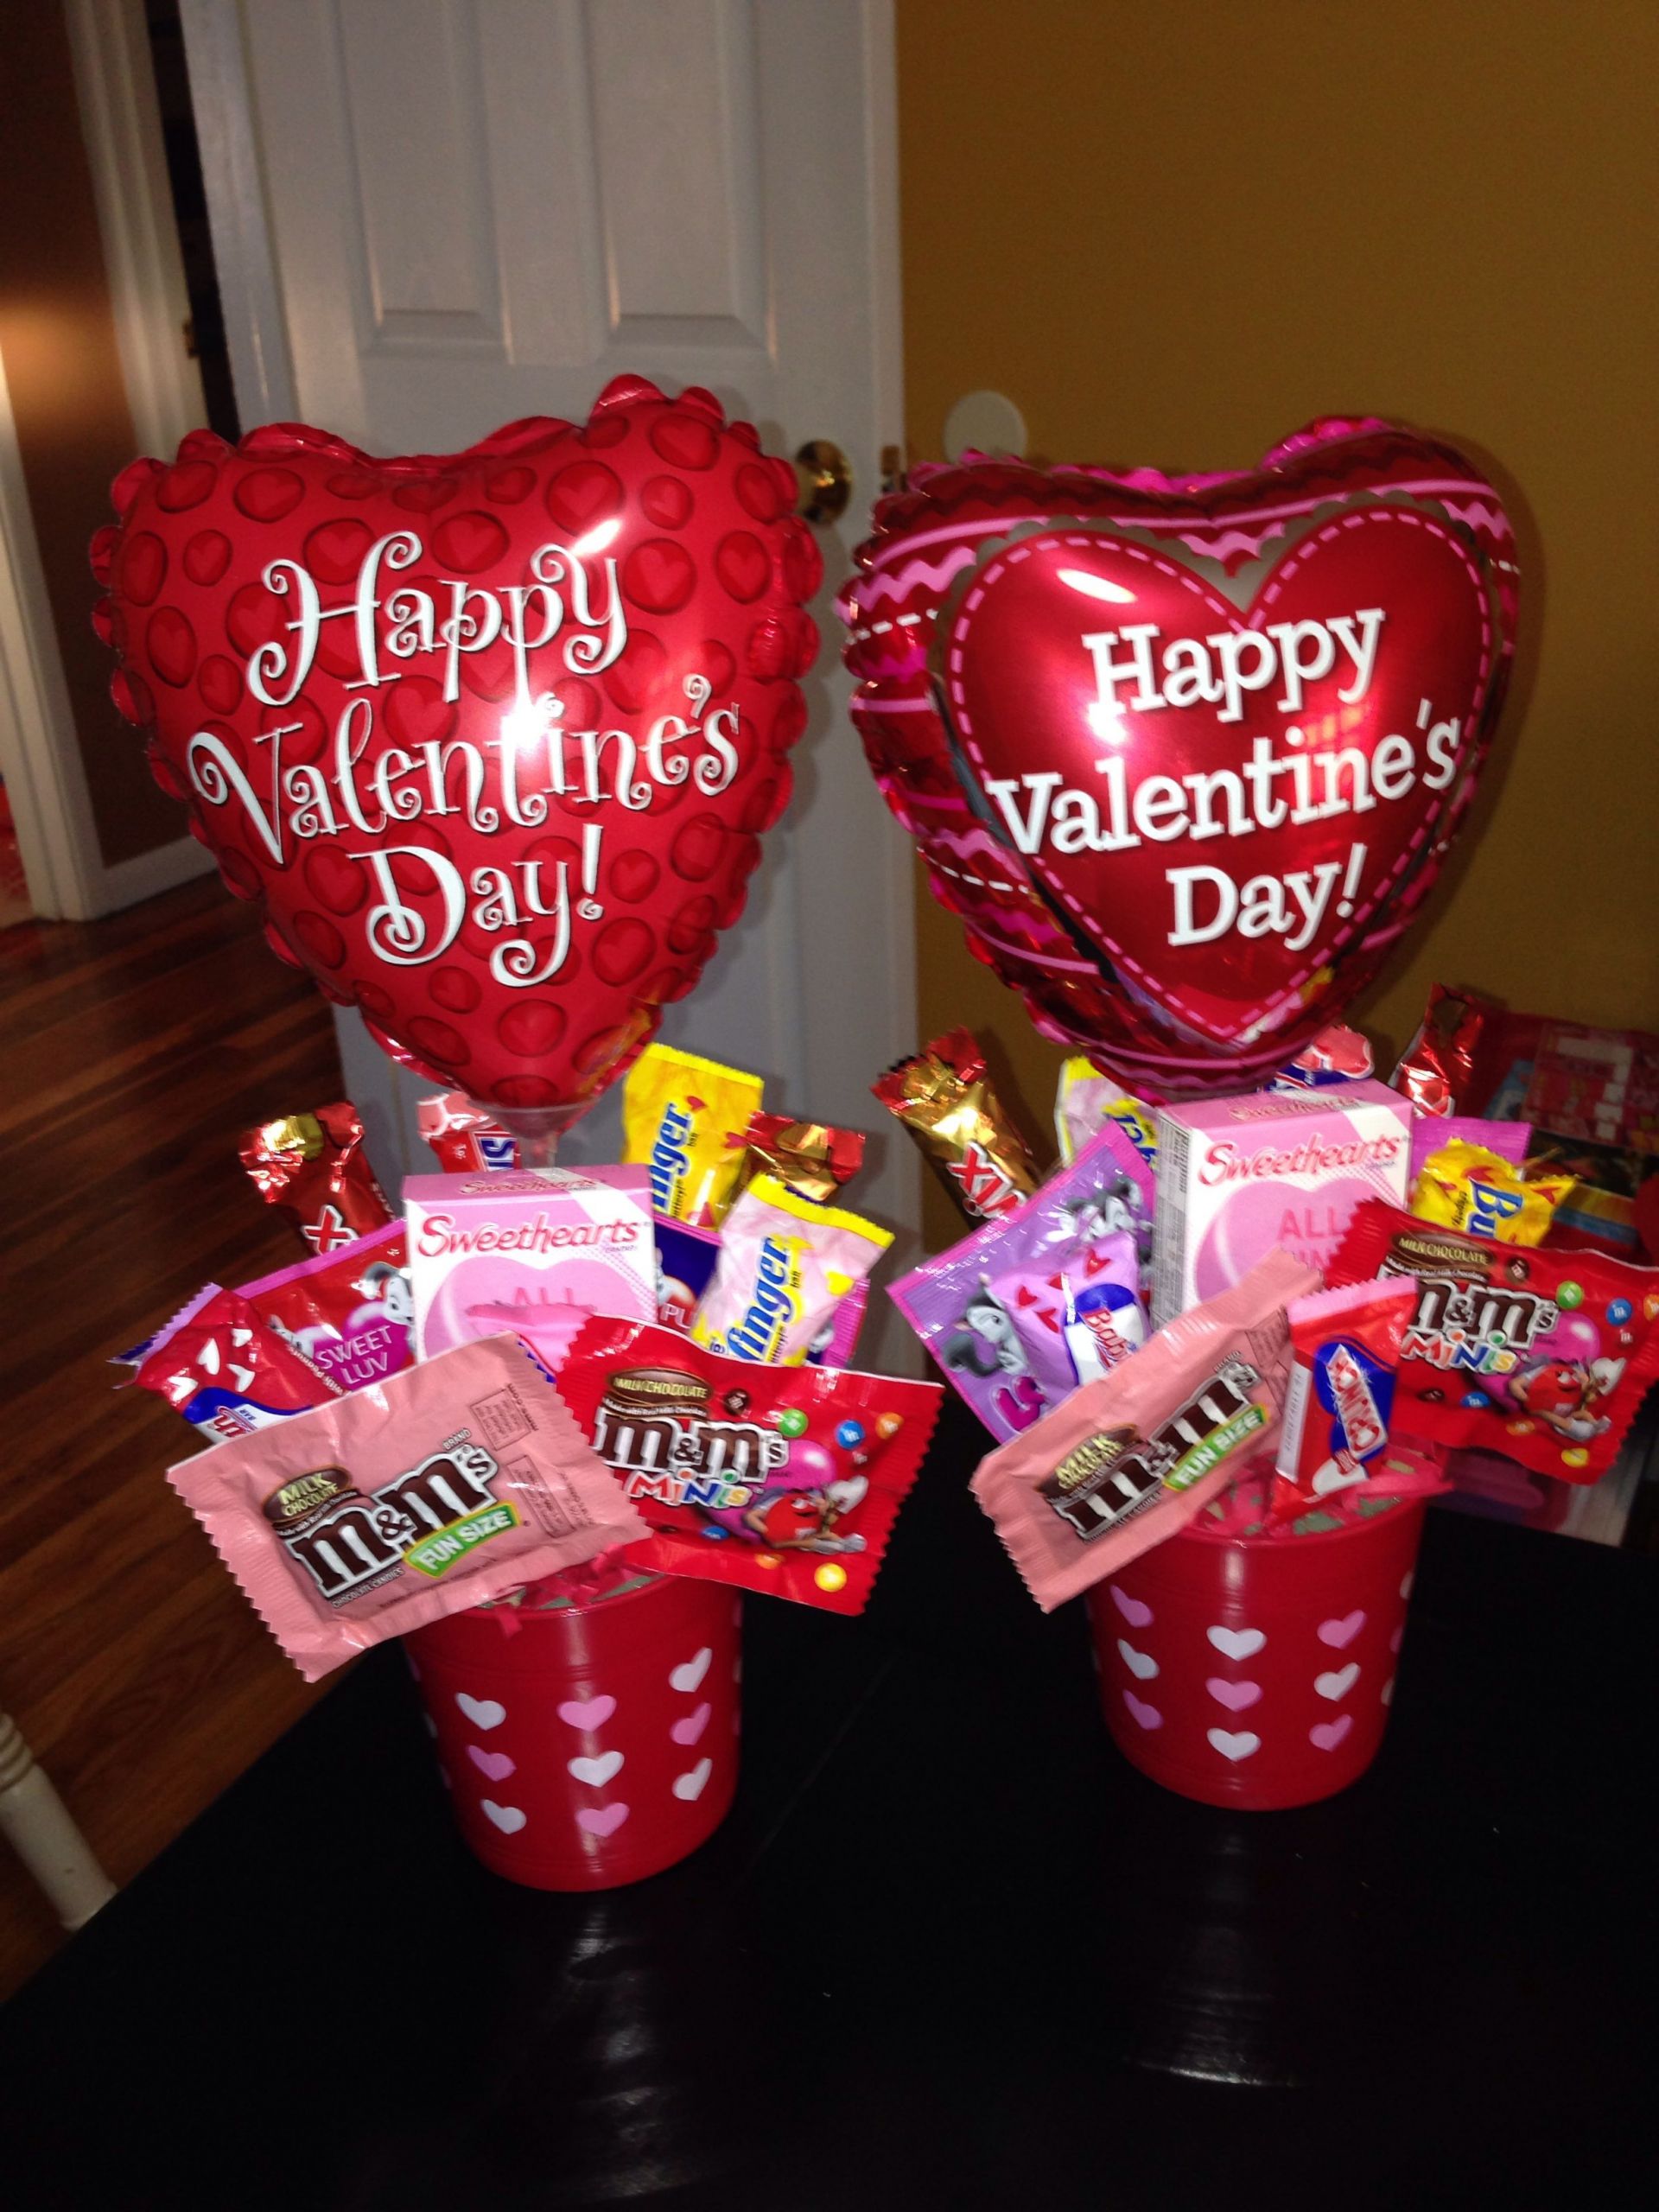 Valentines Day Candy Gift
 Small valentines bouquets